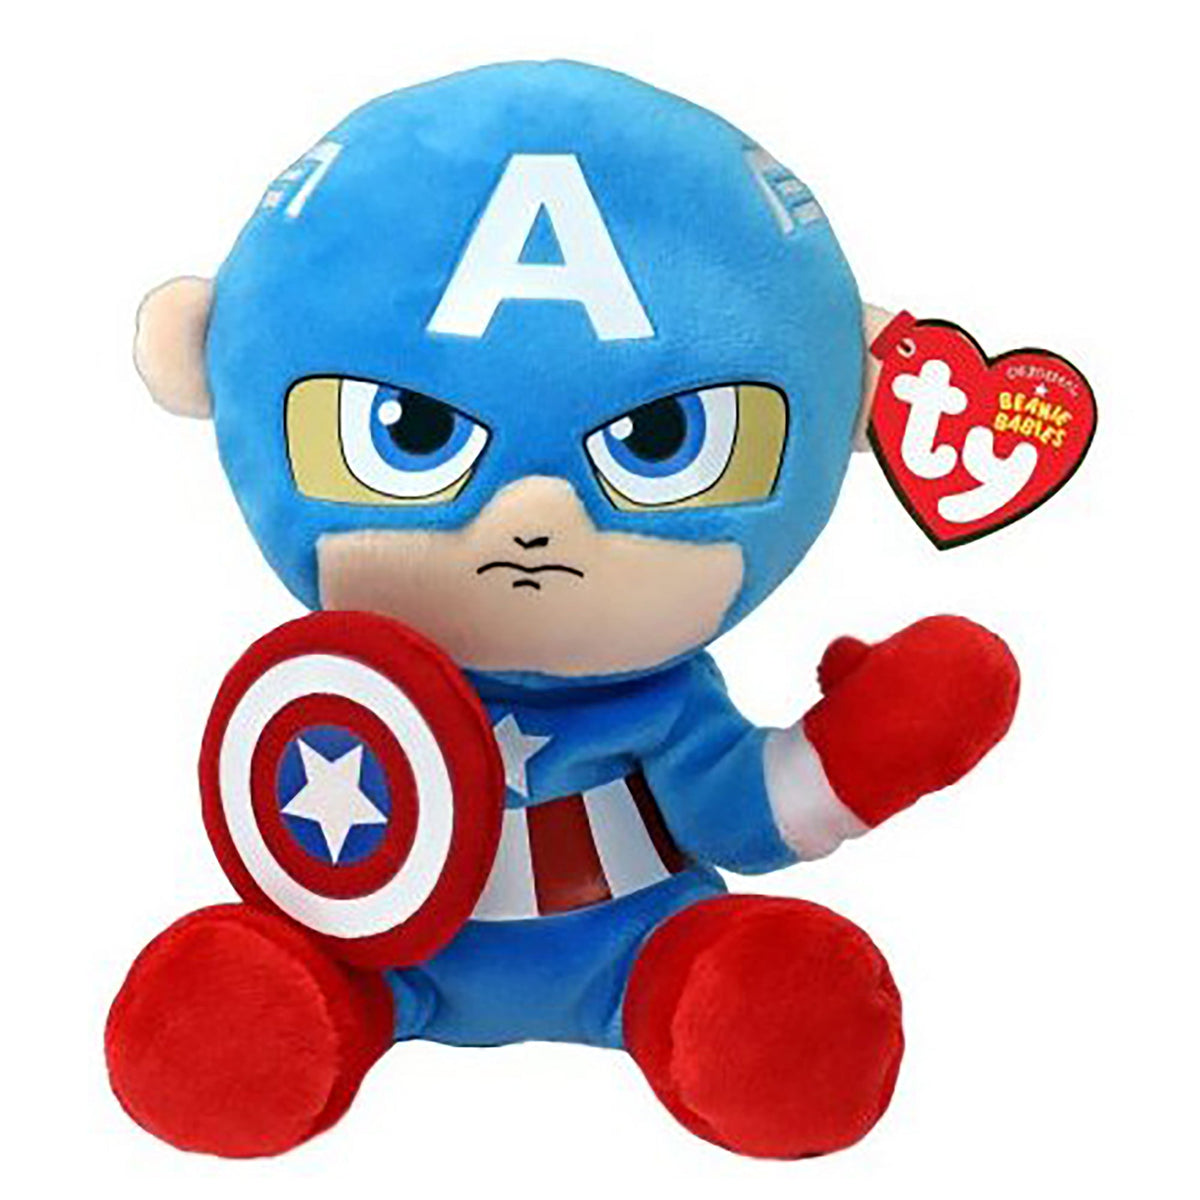 TY INC Plushes TY Marvel Soft Plush, Captain America, 13 Inches, 1 Count 008421450022